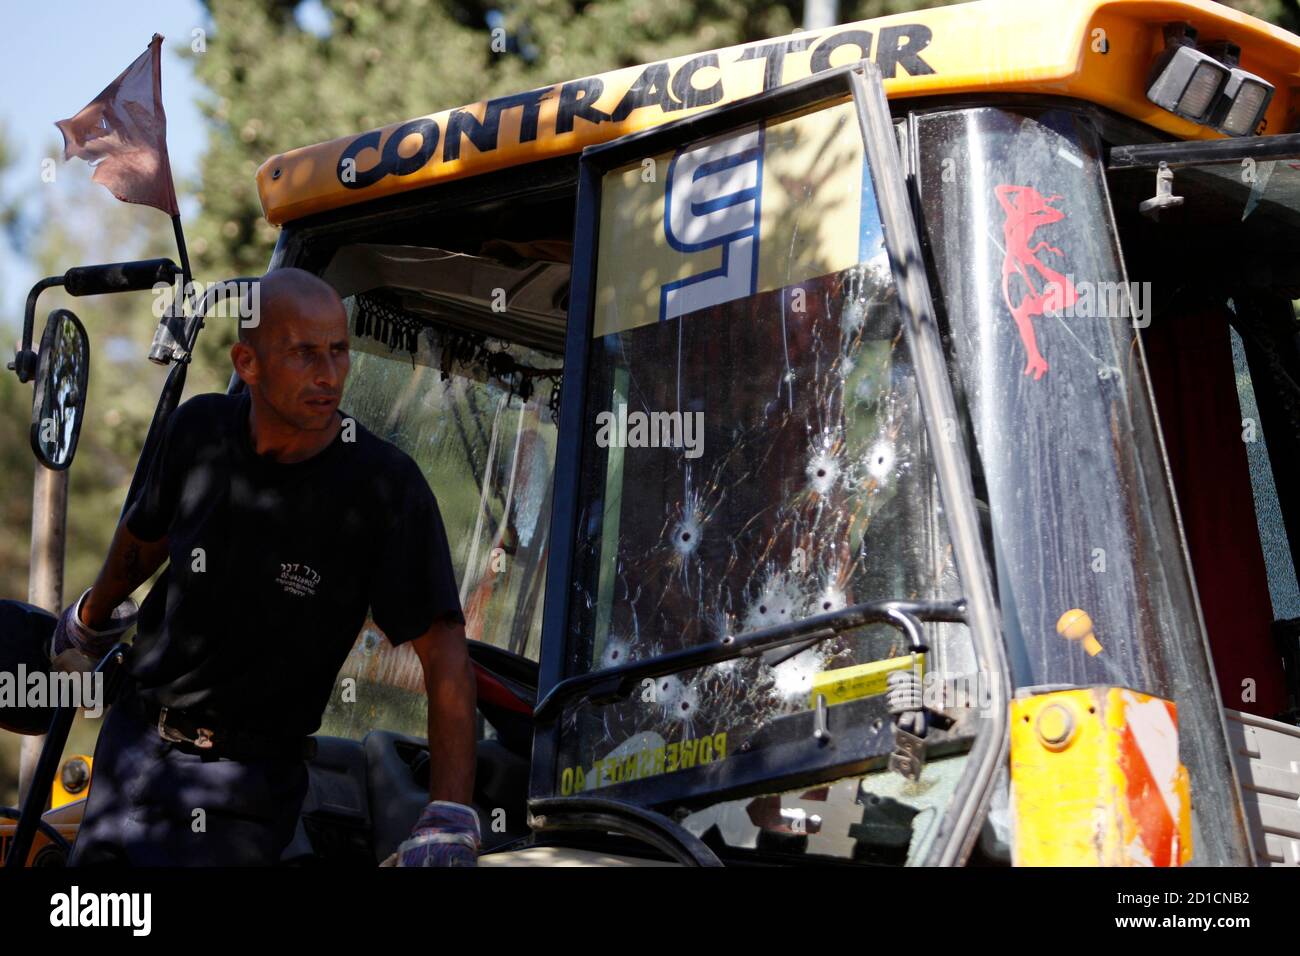 An Israeli worker stands on a bulldozer at the scene of an attack in Jerusalem July 22, 2008. A bulldozer went on a rampage in Jewish west Jerusalem on Tuesday, in the second such attack this month, and rammed into cars before the bulldozer's driver was shot dead, police said.  REUTERS/Baz Ratner (JERUSALEM) Stock Photo